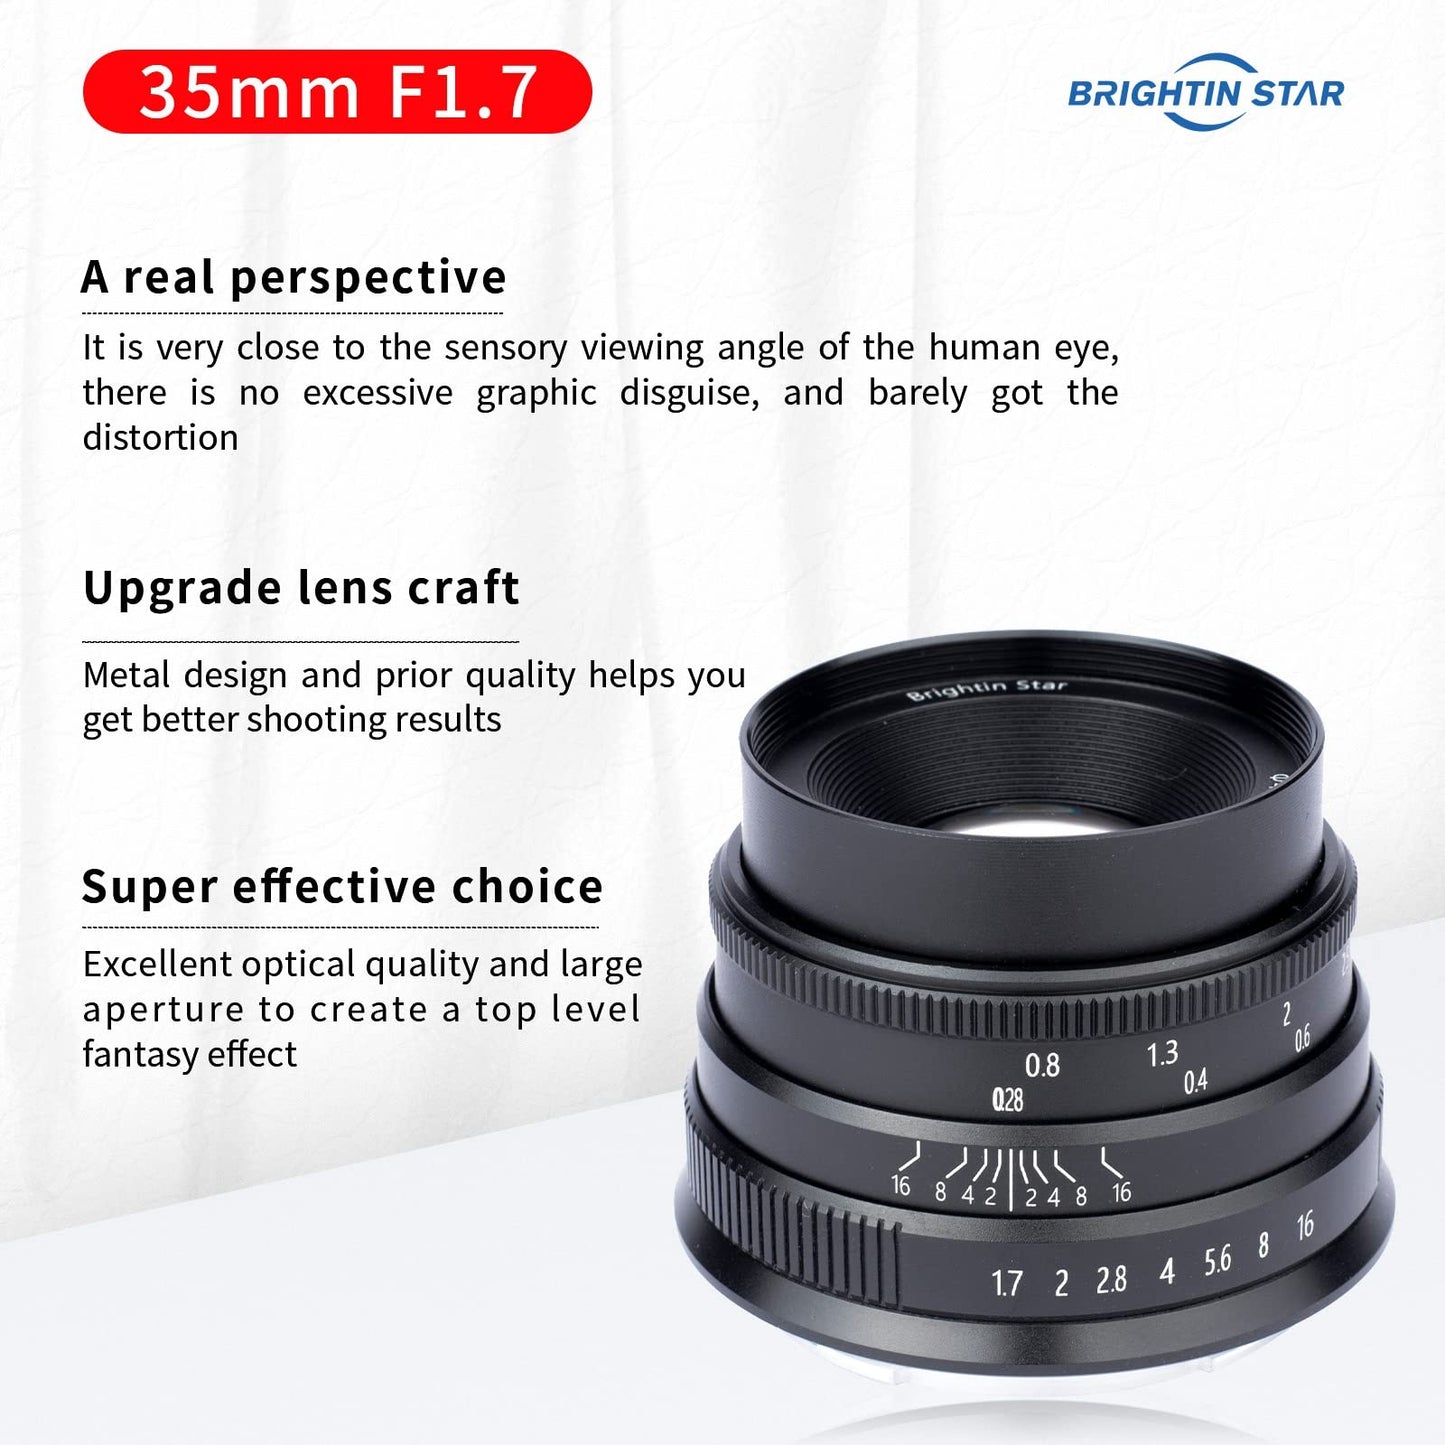 35mm F1.7 Wide-Angle Manual Focus Prime Lens for Panasonic Olympus Micro 4/3 Mirrorless Cameras, MFT APS-C Large Aperture, Fit for LUMIX G7, G7KS, GX85, GX9, G95, GH5, GH6, G100, G9